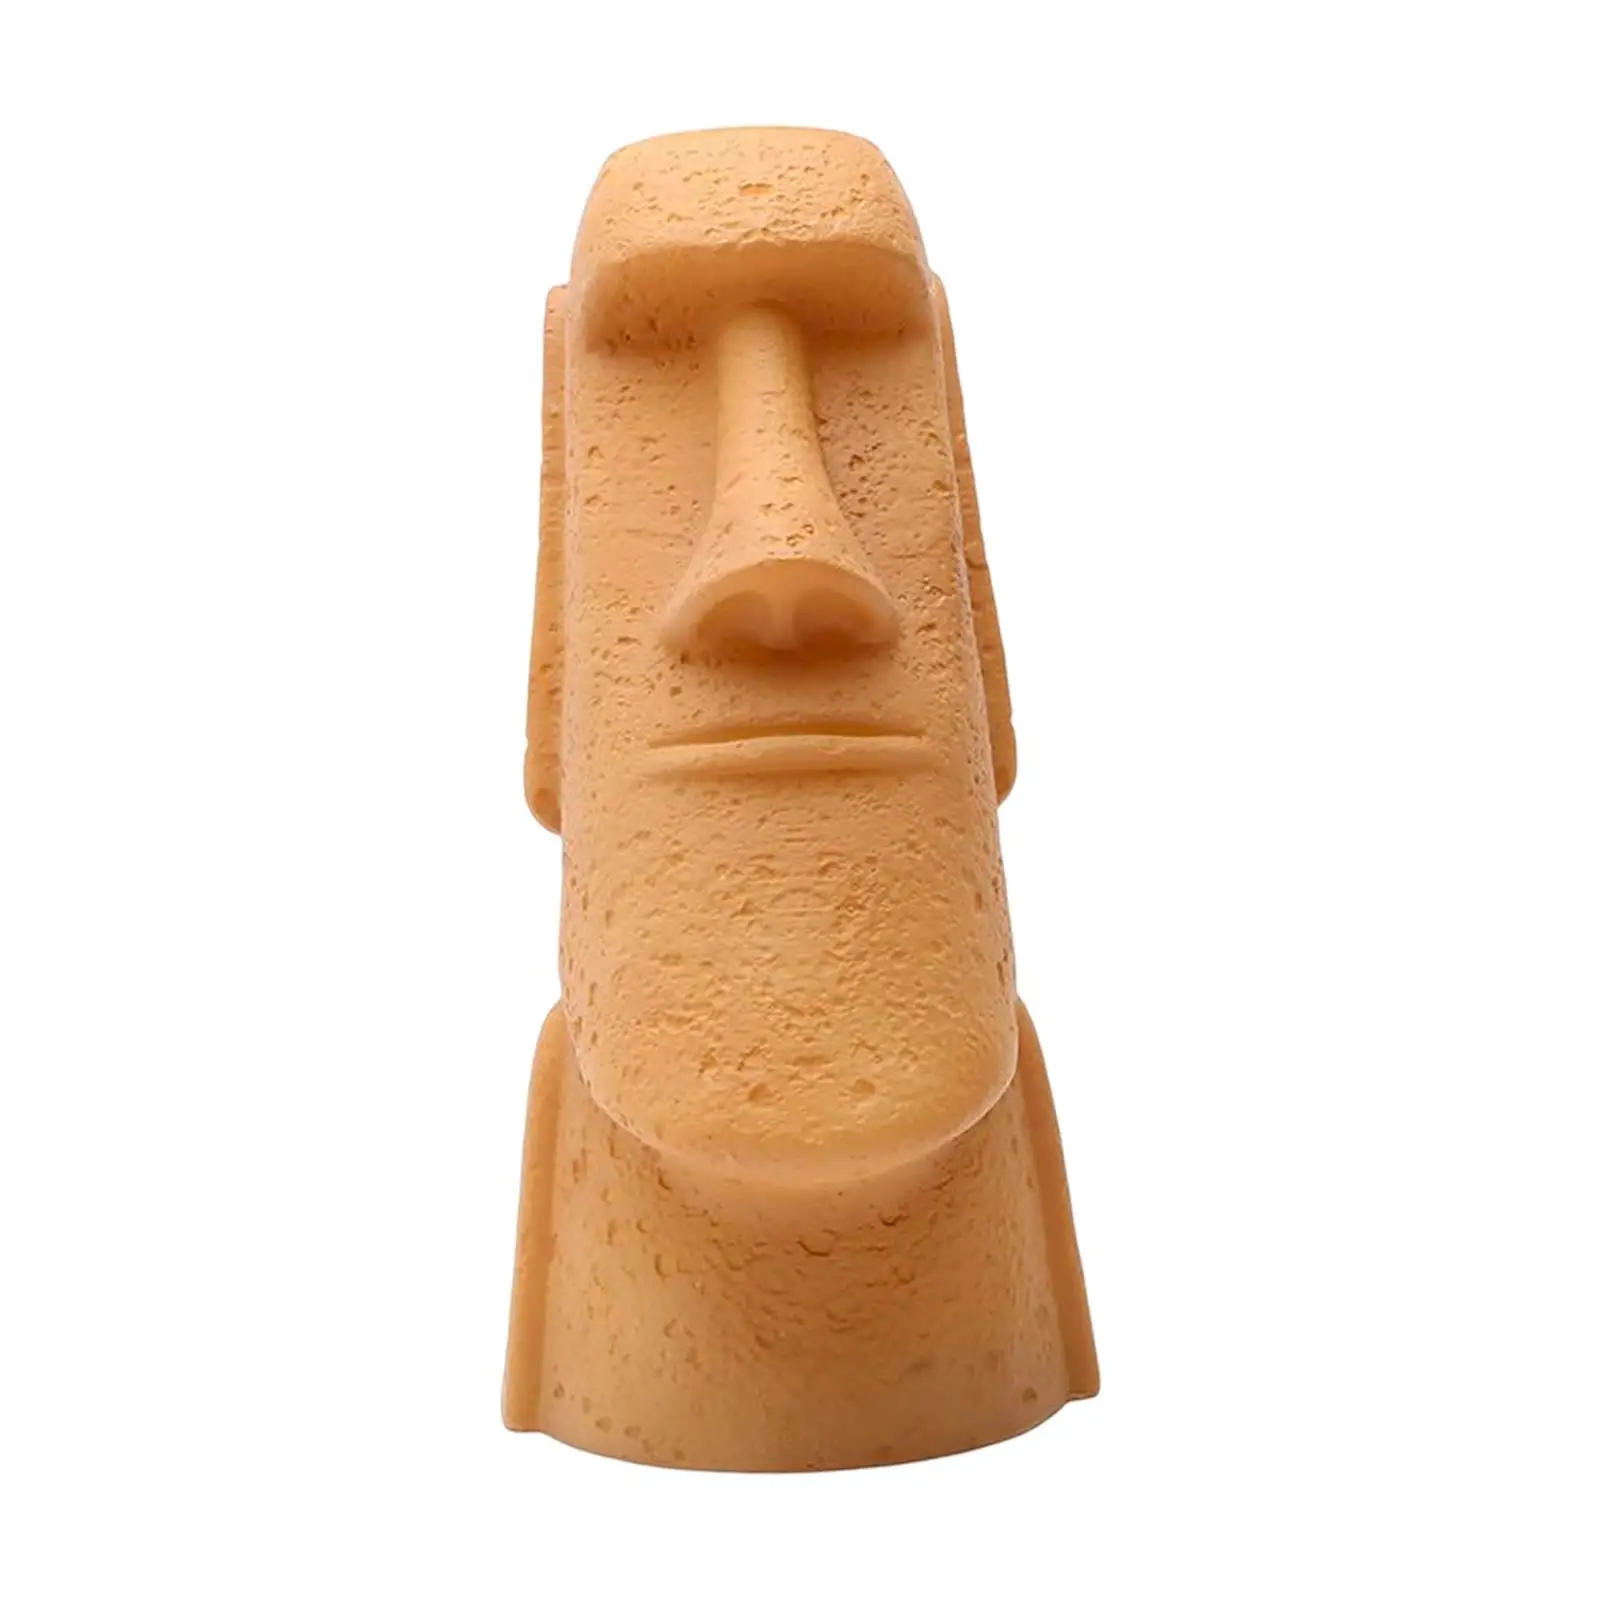 Easter Island Head Statue Light Lamp Resin Figurine Auto Off for Living Room